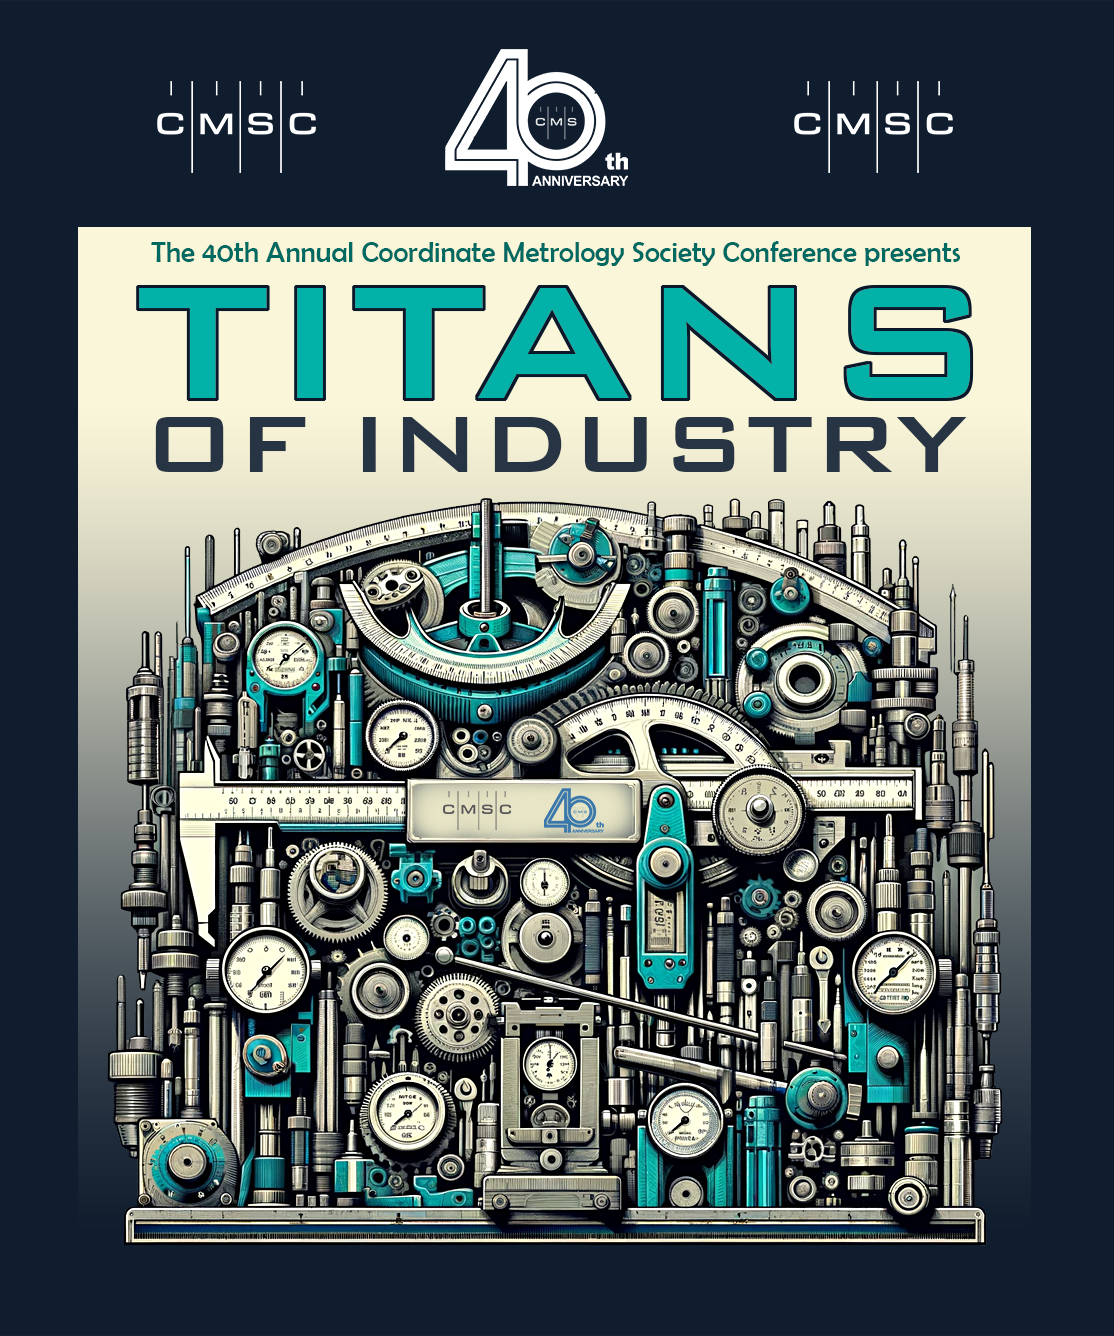 CMSC - TITANS OF INDUSTRY